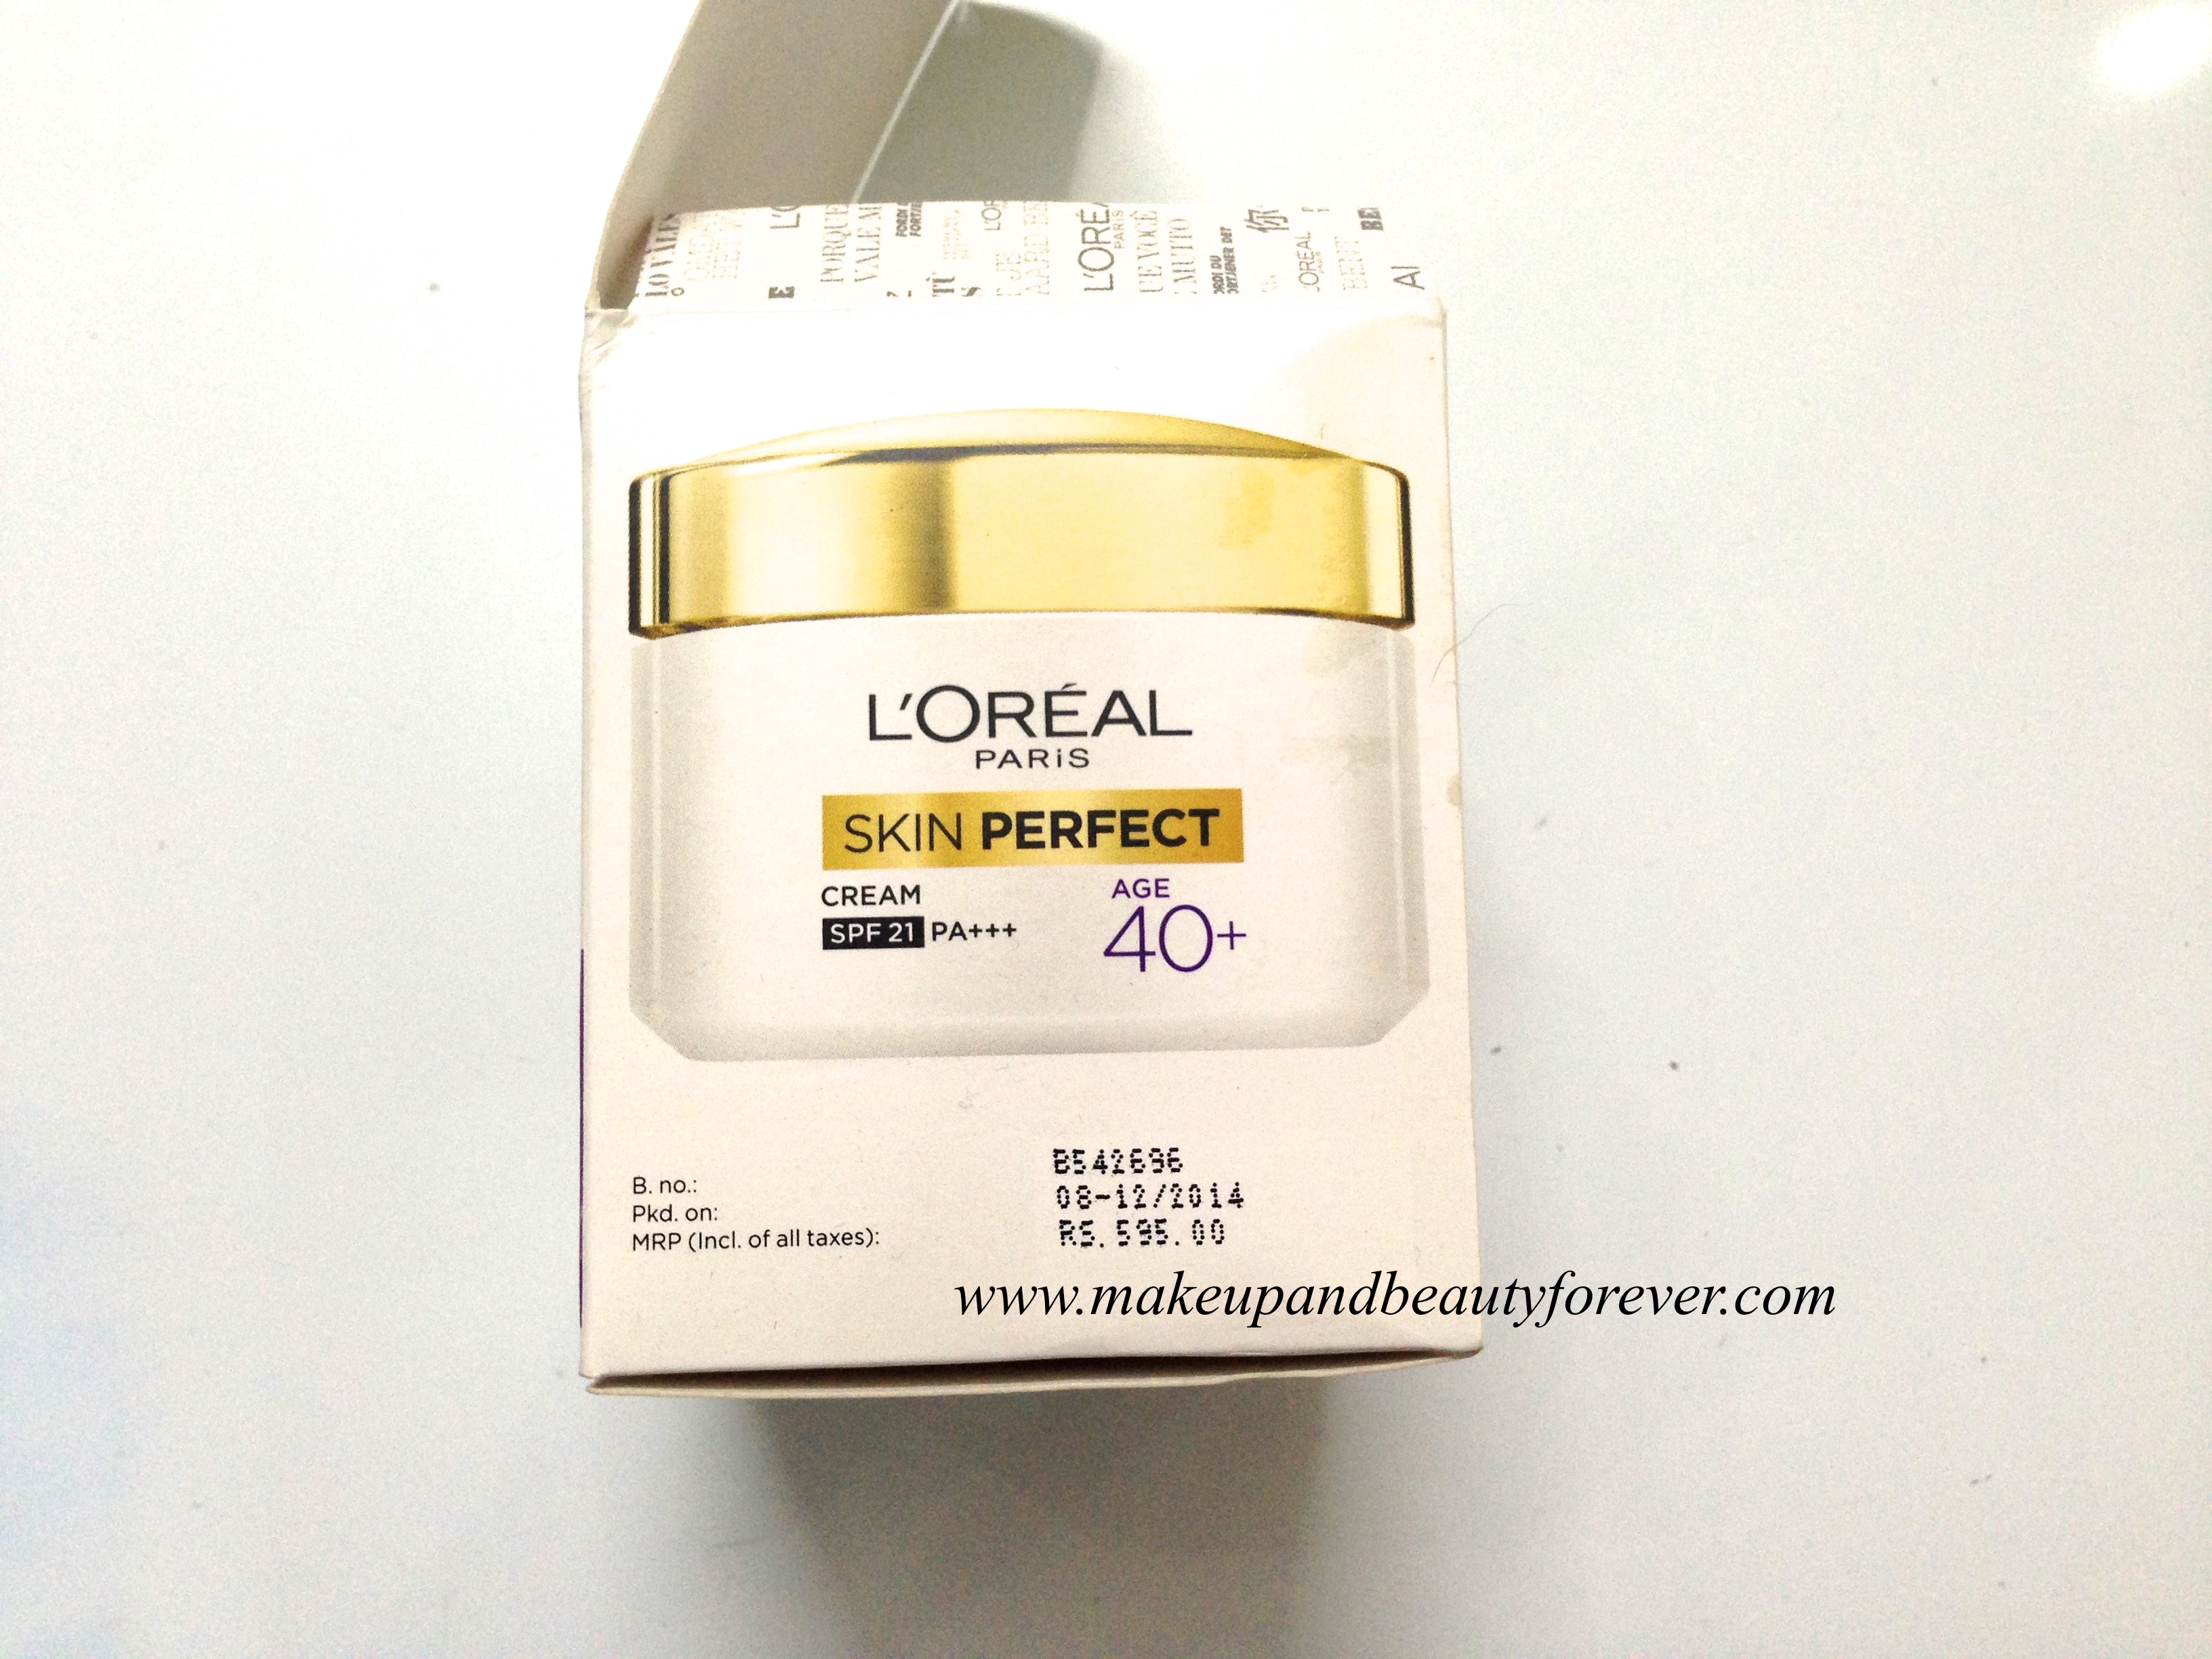 L'Oreal Paris Skin Perfect Anti-Aging + Whitening Cream For Age 40+ Review in India ...